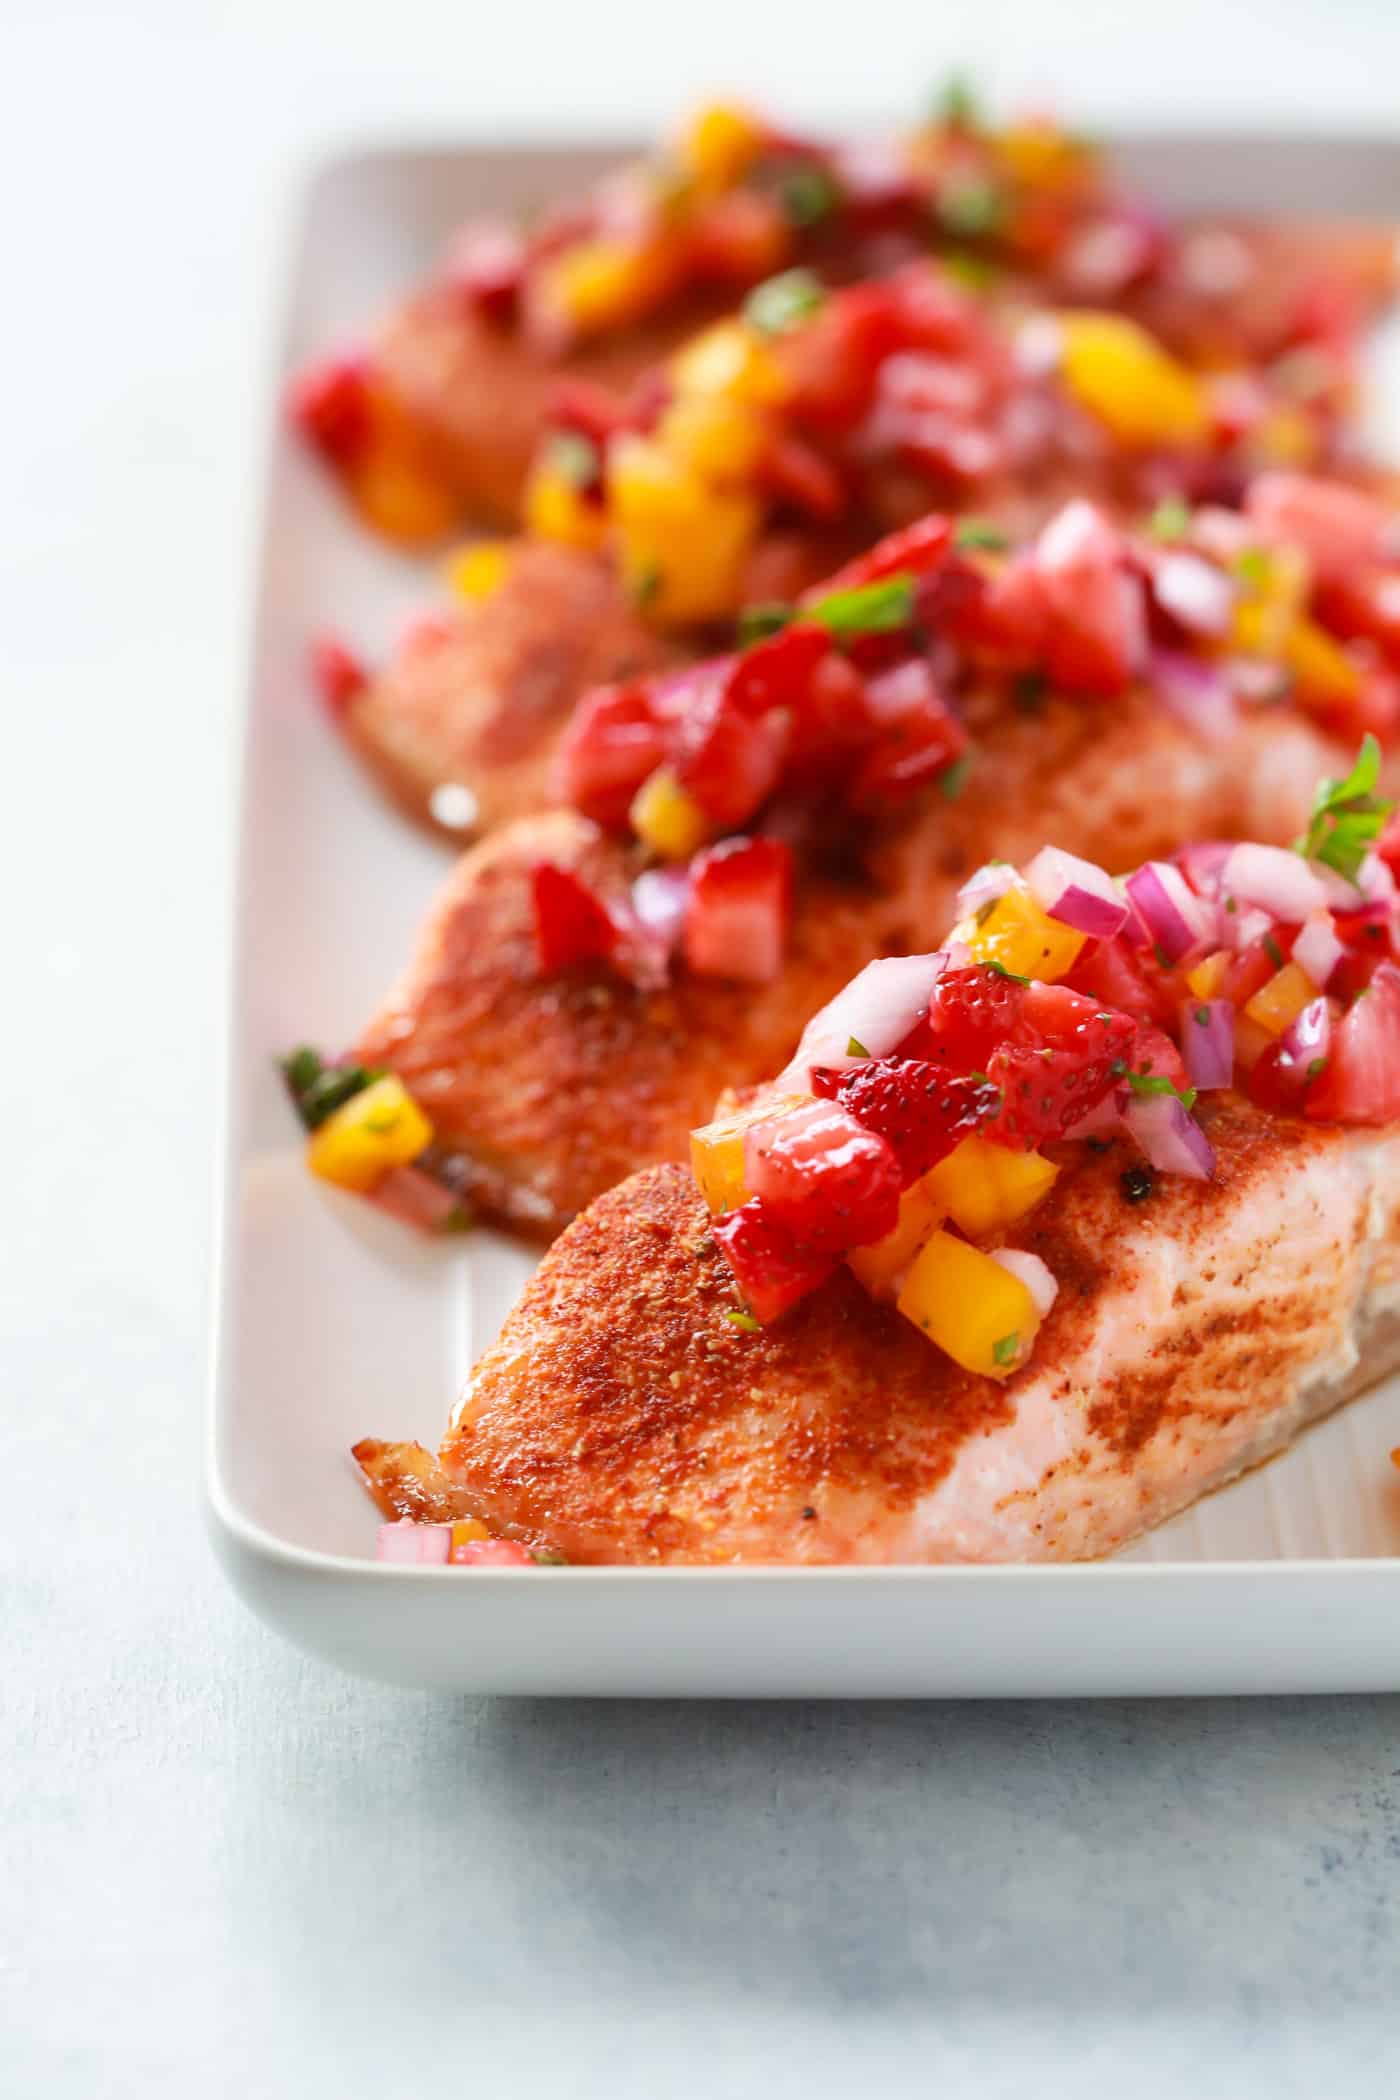 This Cajun Salmon with Strawberry Salsa is a perfect summer lunch or light dinner to enjoy during the week. It's easy to make, gluten-free, low-carb and paleo-friendly. 